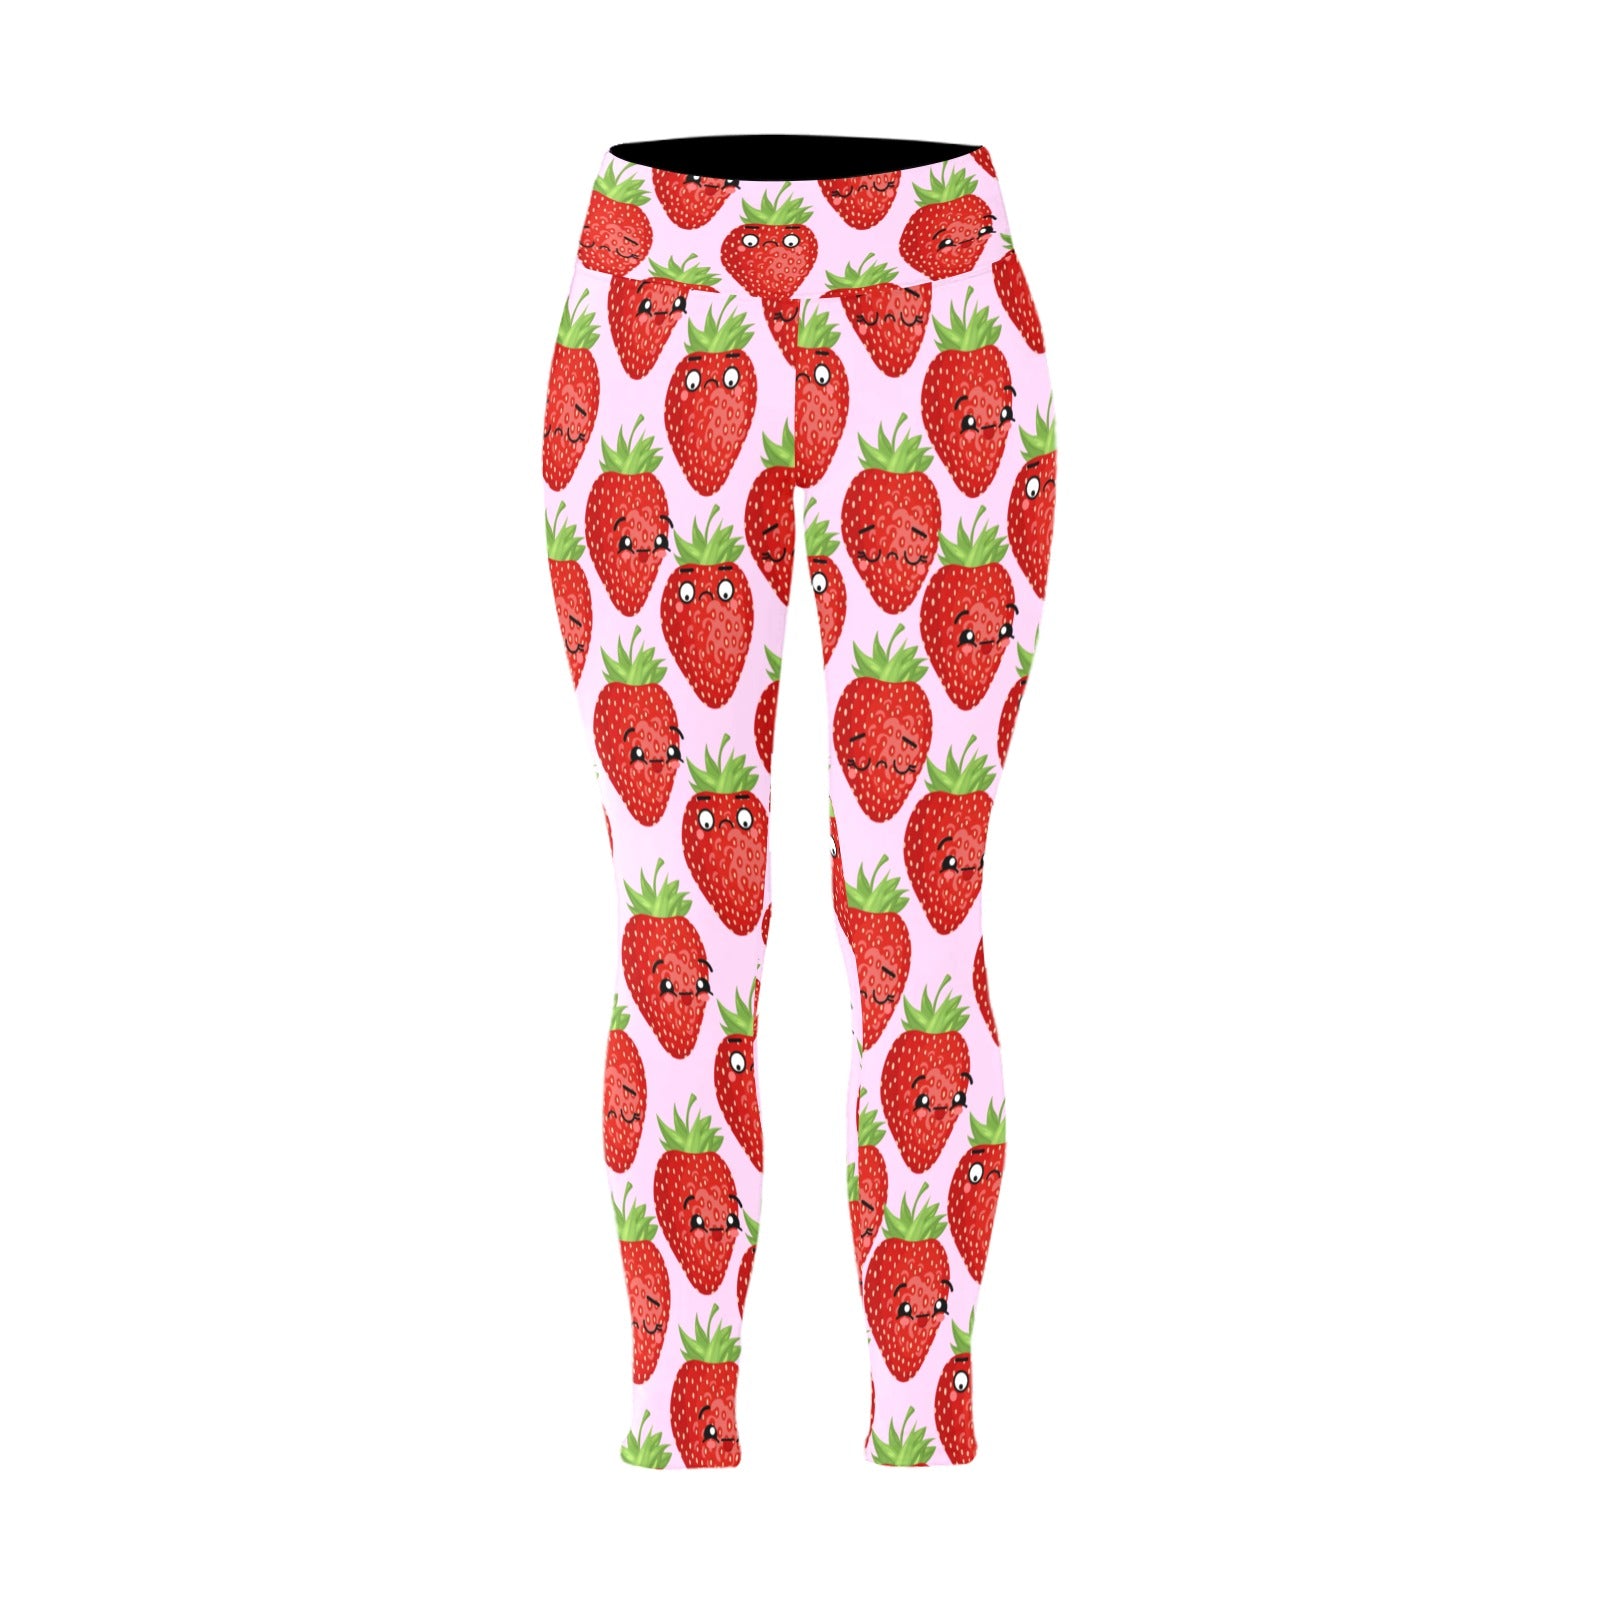 Strawberry Characters - Women's Plus Size High Waist Leggings Women's Plus Size High Waist Leggings